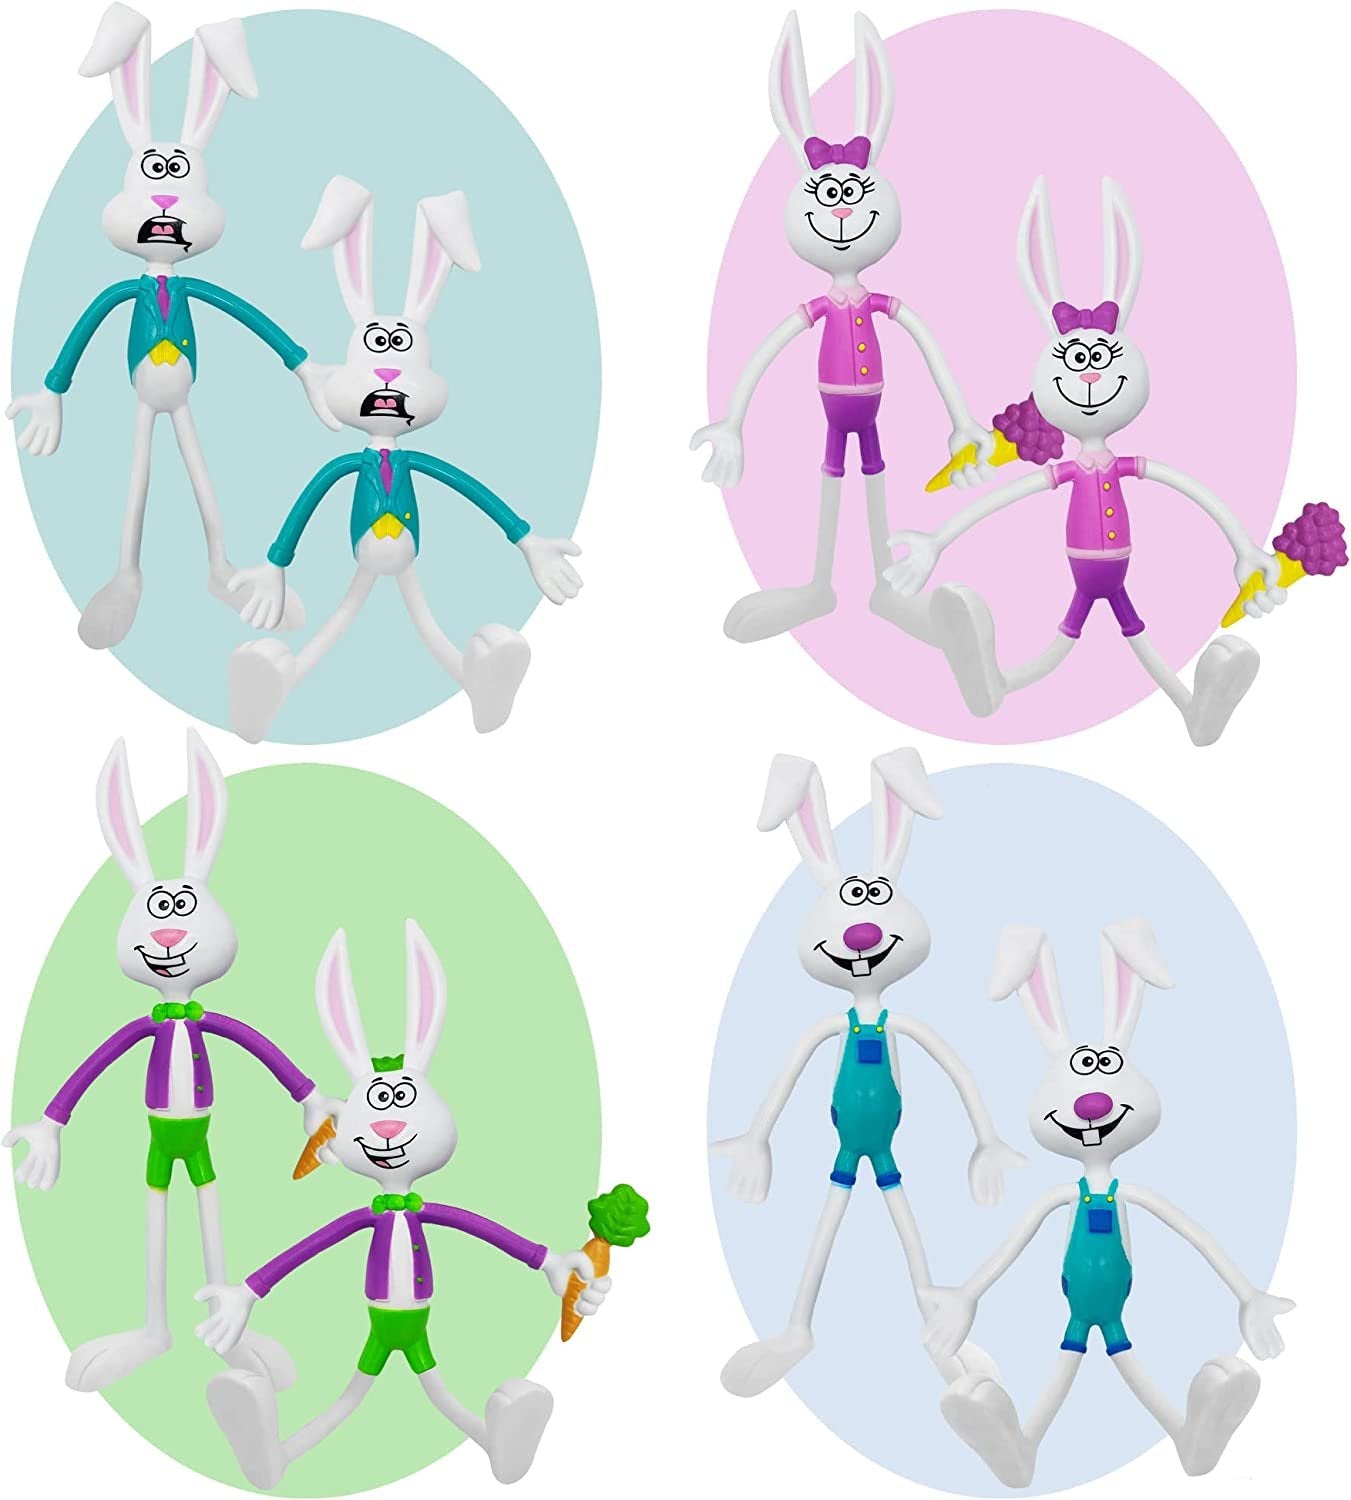 Easter Bunny Bendable Figurines, Set of 8, Fidget Easter Toys with 4 Colorful Designs, Great as Easter Egg Fillers, Egg Hunt Supplies, Easter Basket Toys, and Stress Relief Fidgets